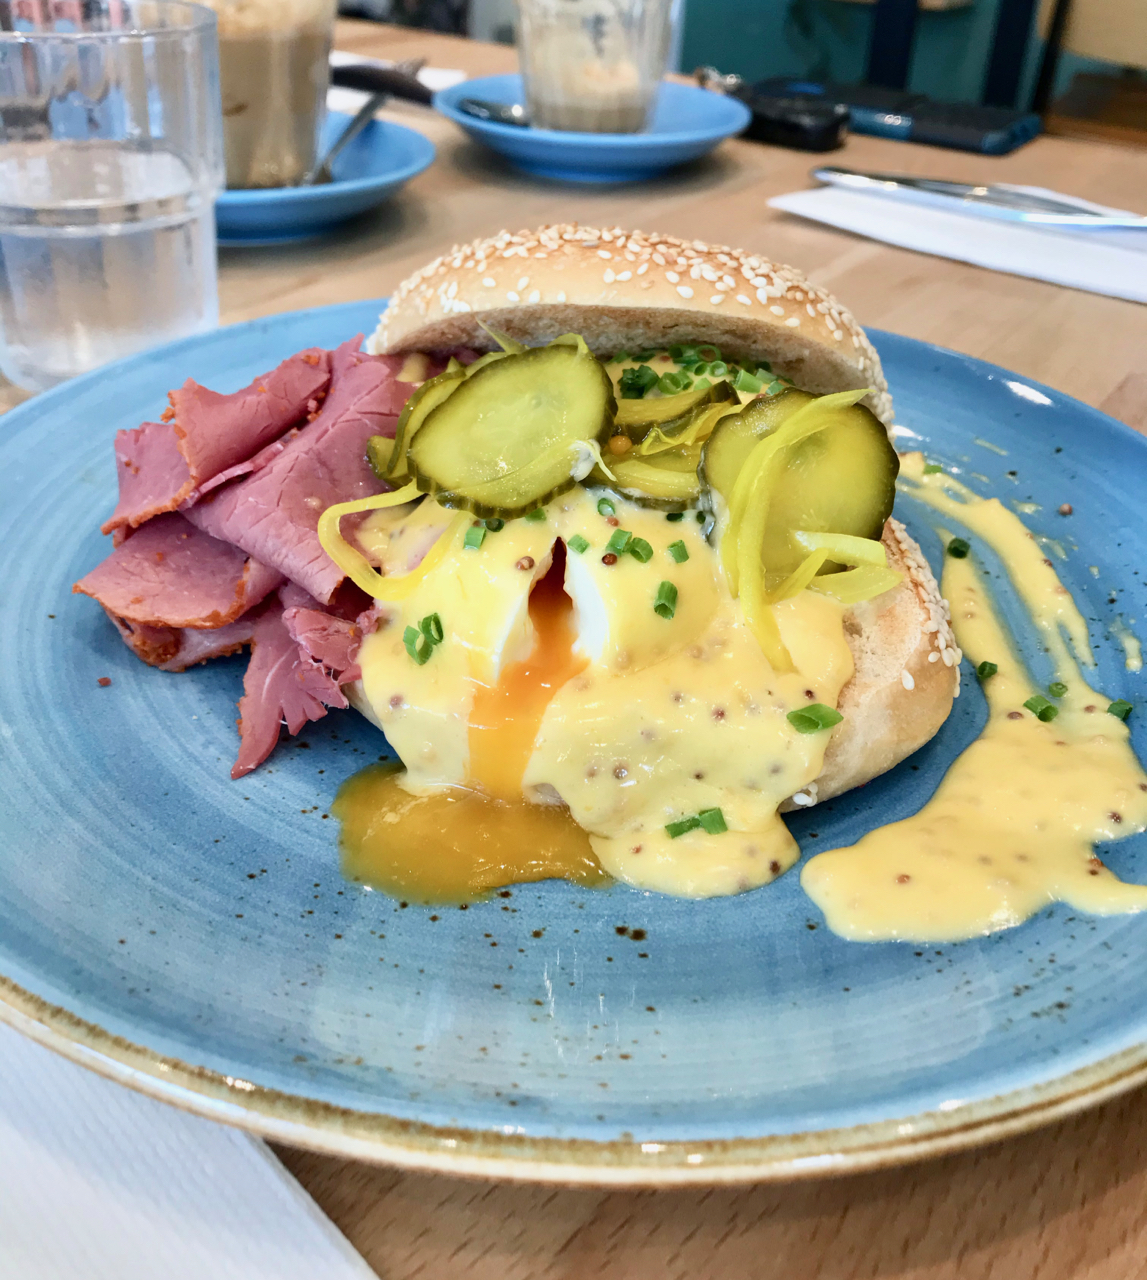 Eggs benedict served with shaved pastrami and pickles on a bagel